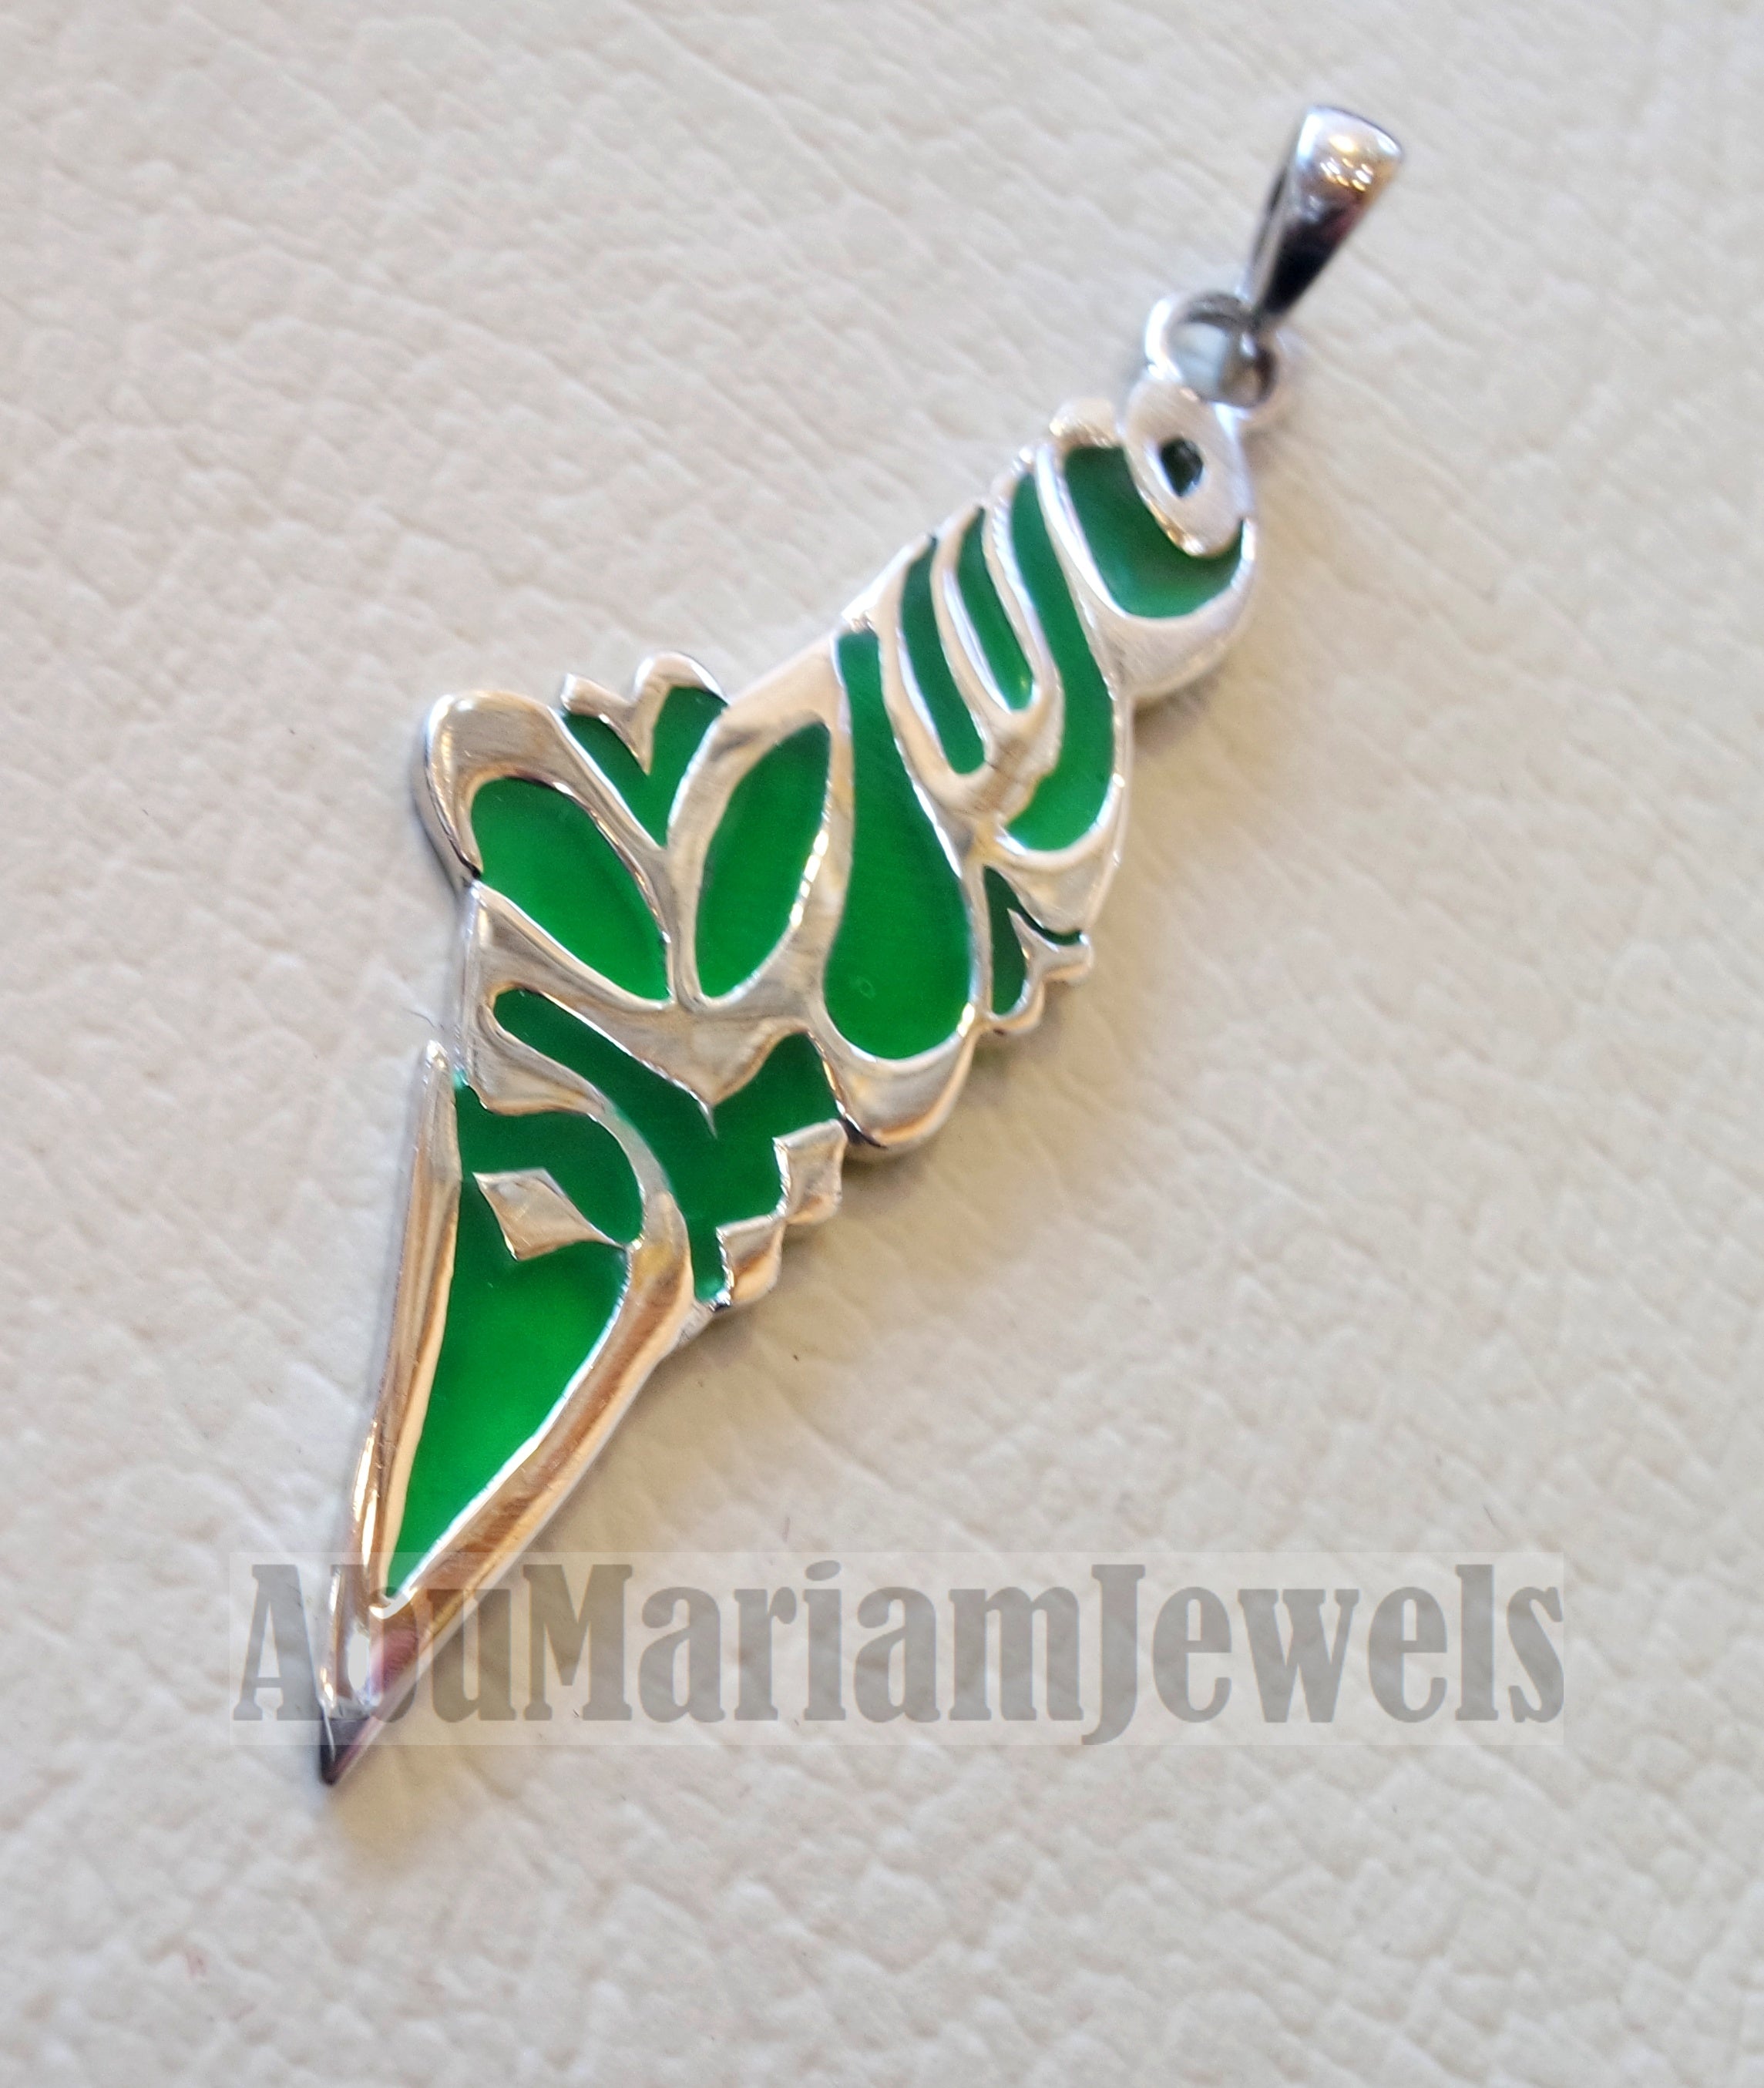 Palestine map pendant sterling silver 925 k high quality with green enamel jewelry arabic calligraphy fast shipping خارطه فلسطين